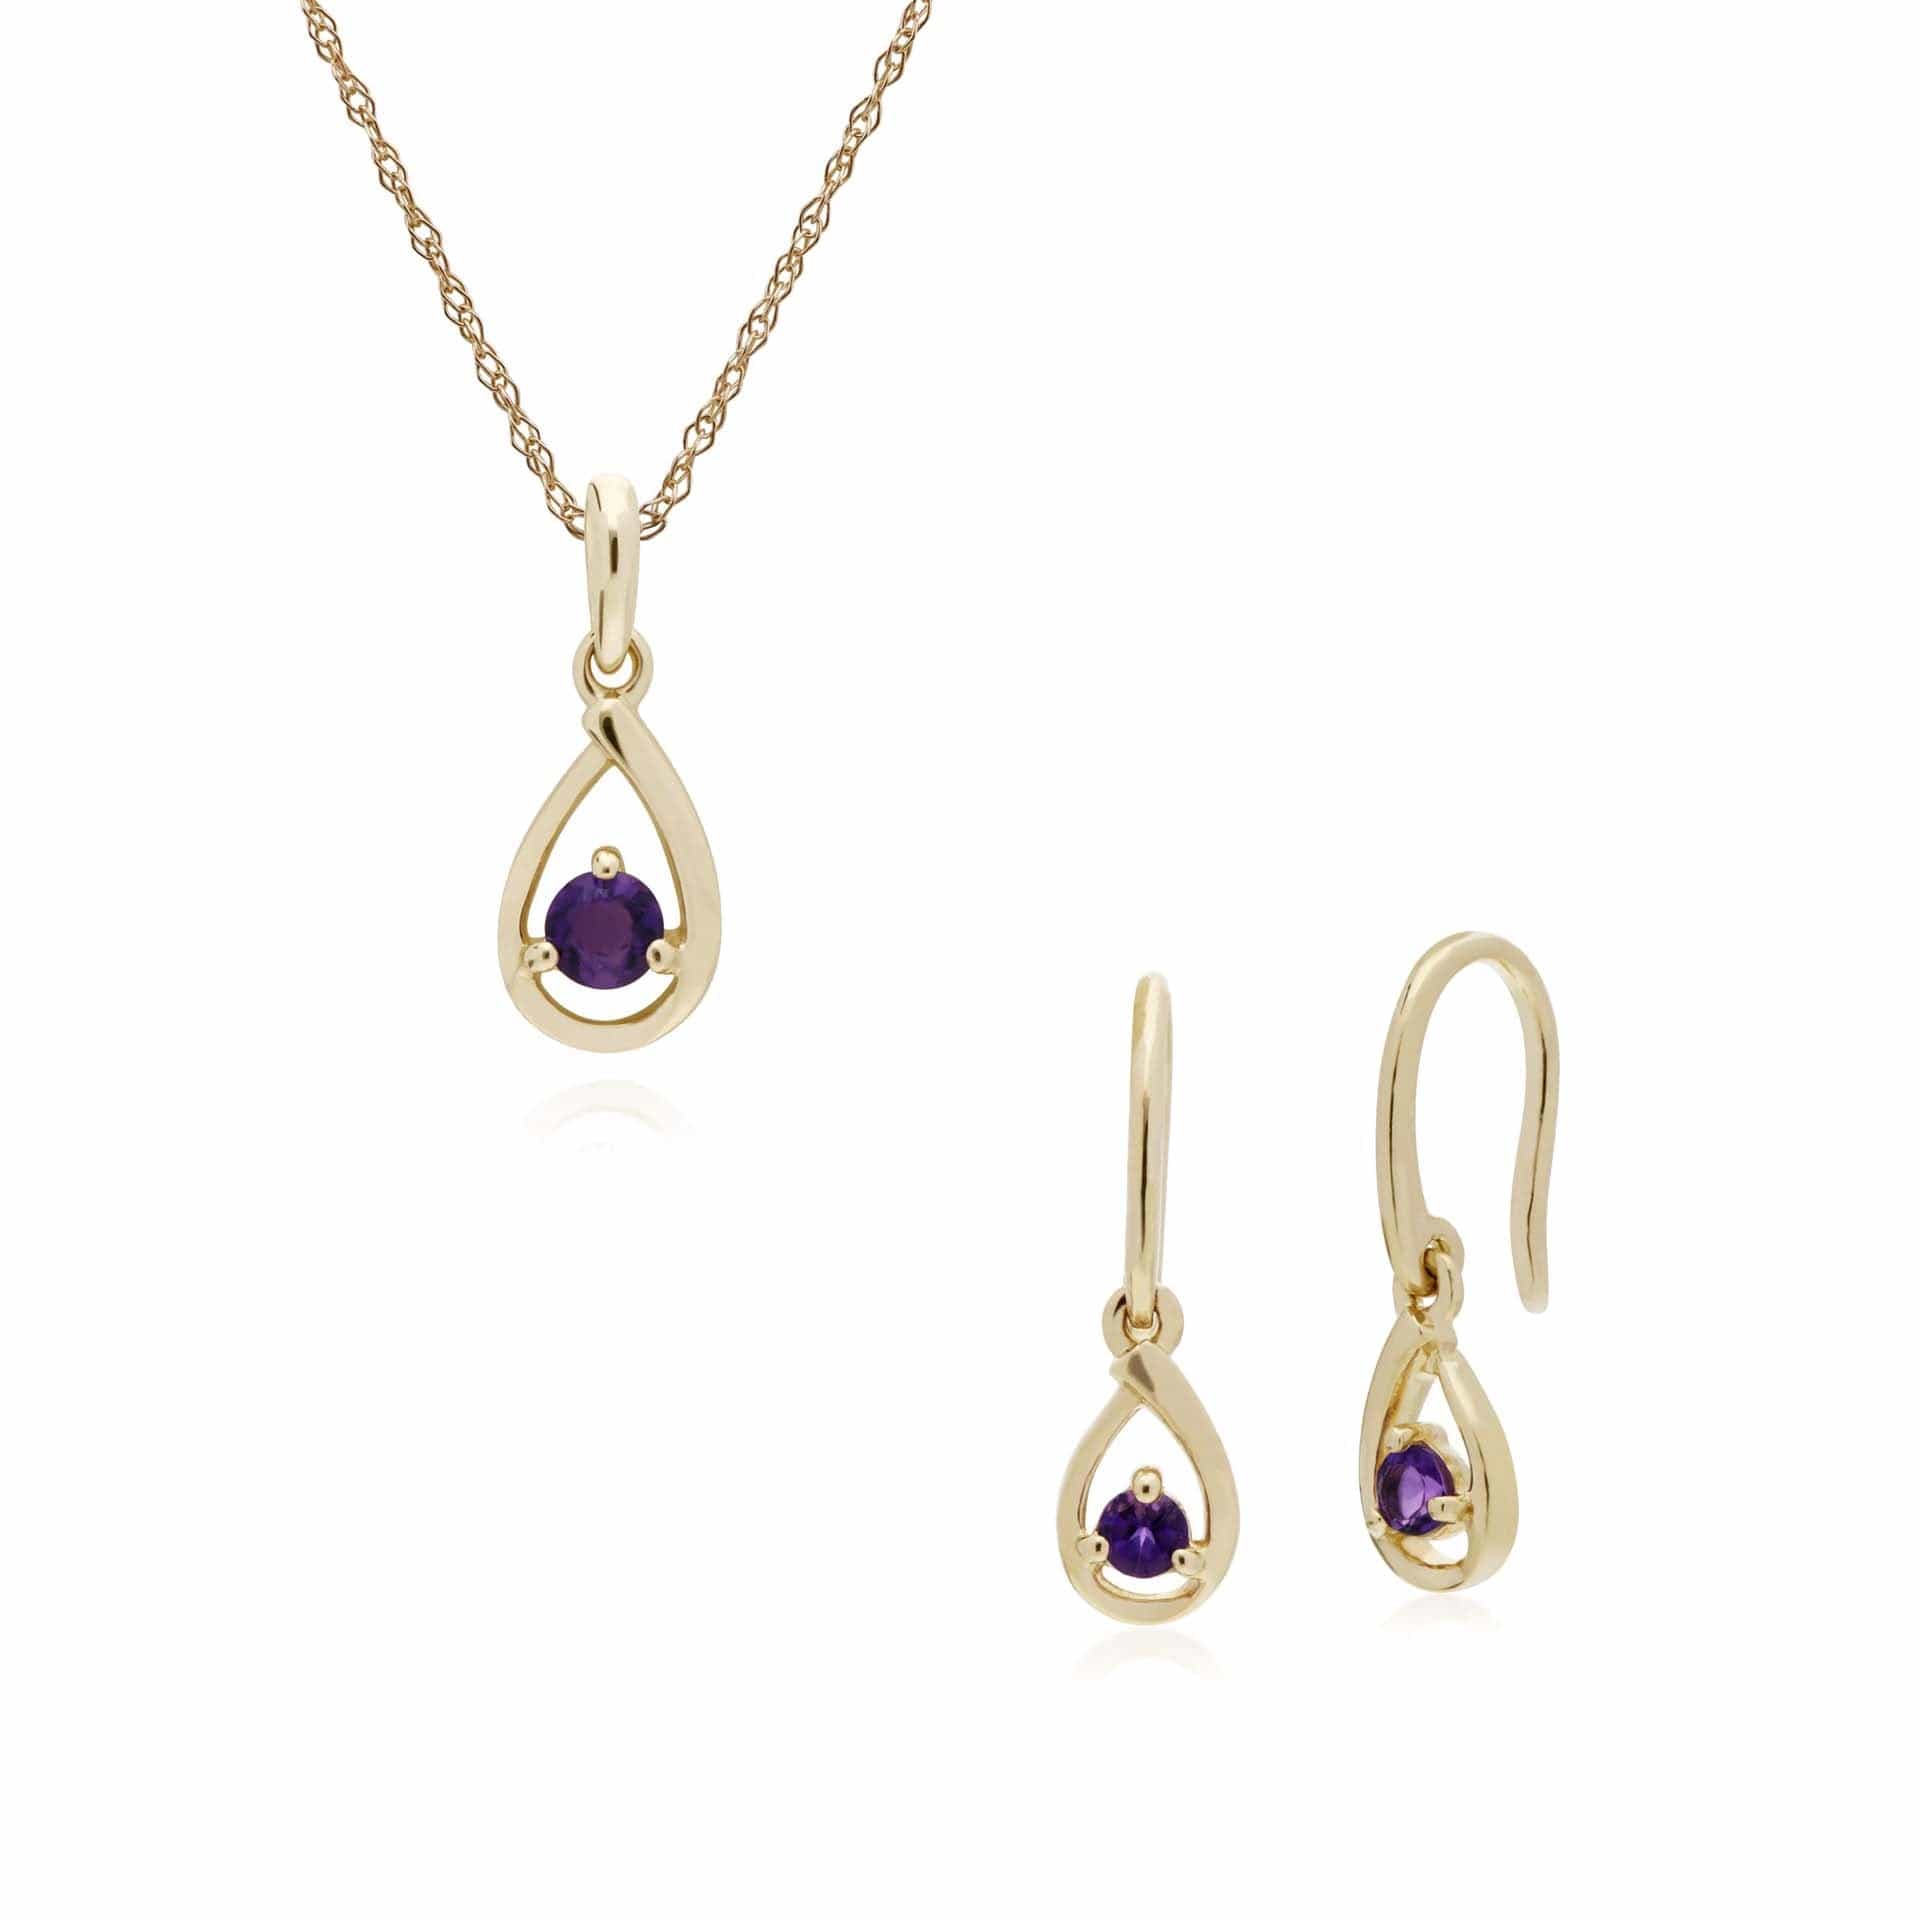 135E1190059-135P1551059 Classic Round Amethyst Single Stone Tear Drop Earrings & Necklace Set in 9ct Yellow Gold 1